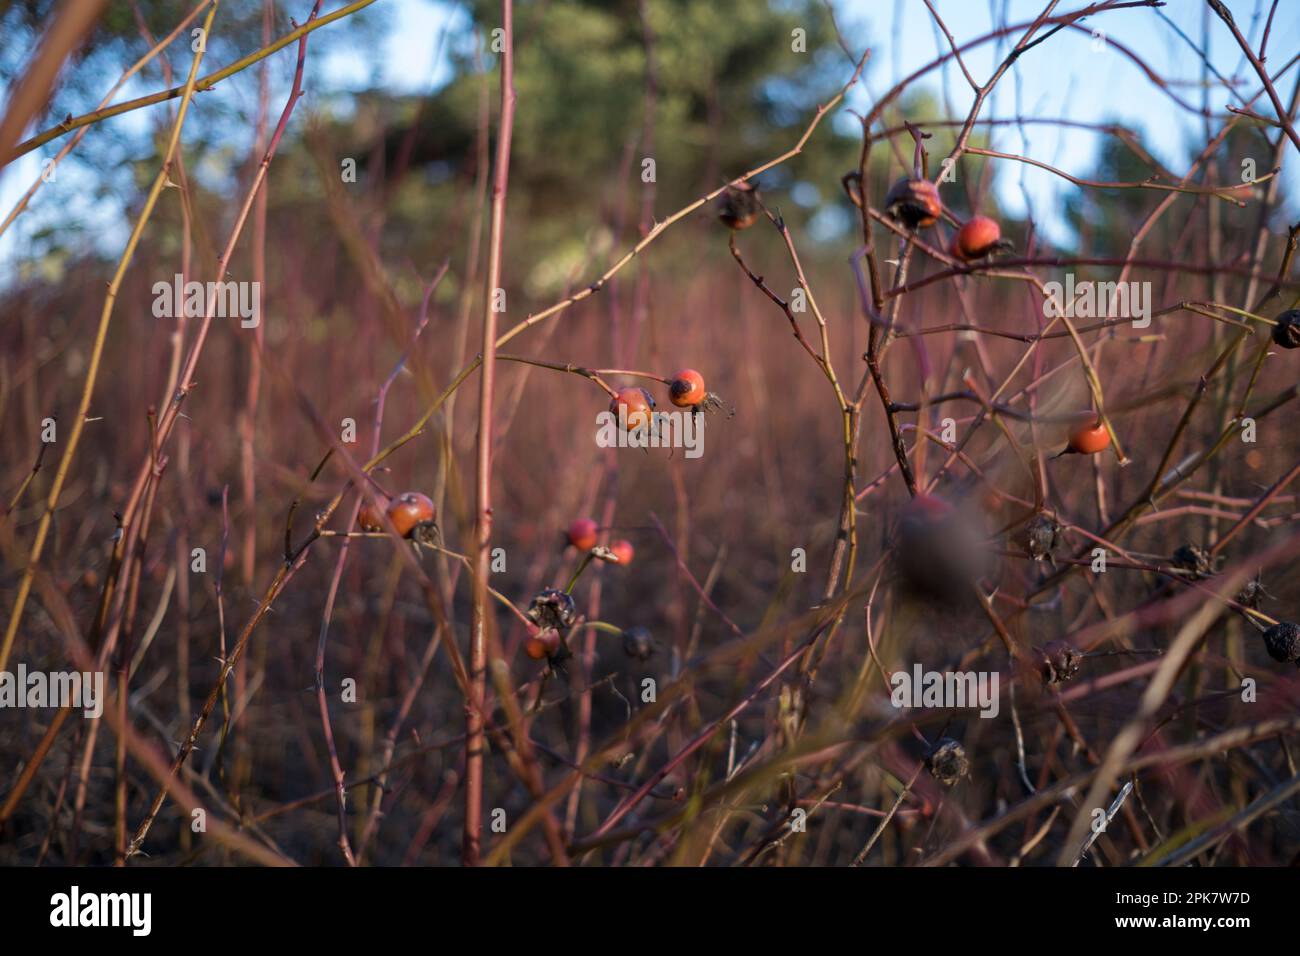 Surface view of plants, grasses and Nootka rose plants with berries. Stock Photo